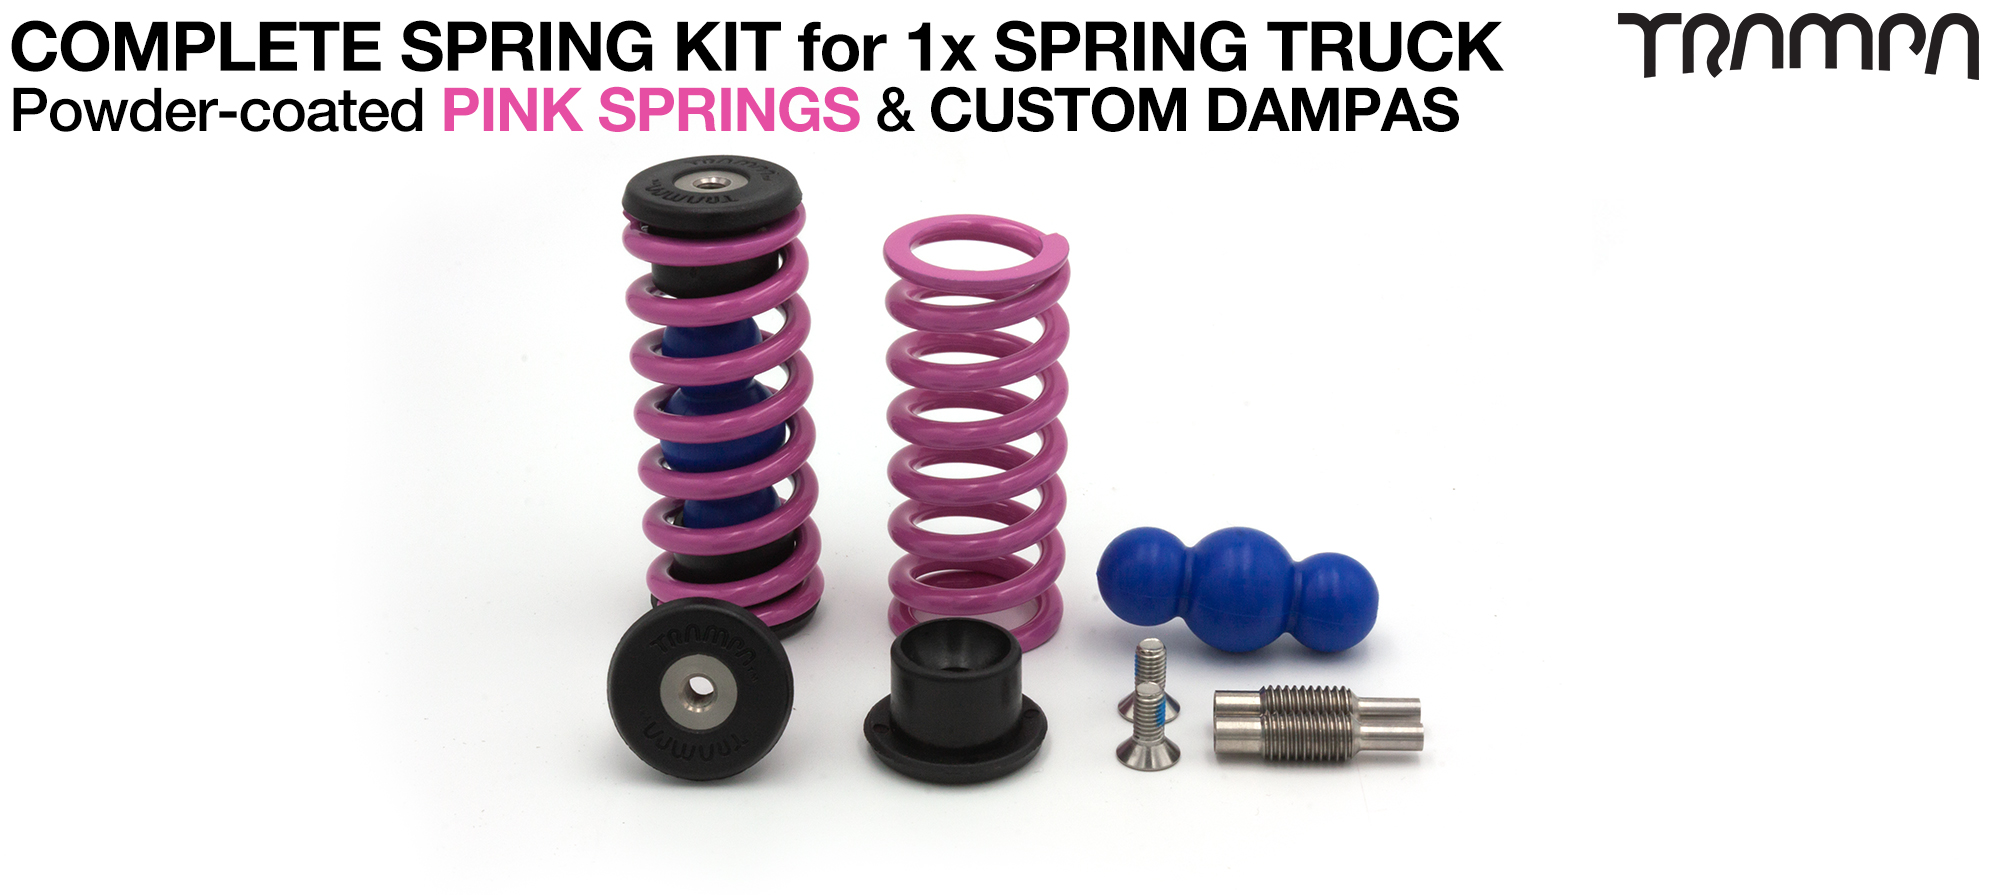 Spring kit Complete for 1x Truck - 2x Spring 2x Dampa 4x Spring Retainers 2x Spring Adjuster & 2 M5x12mm Countersunk Bolt PINK Springs 